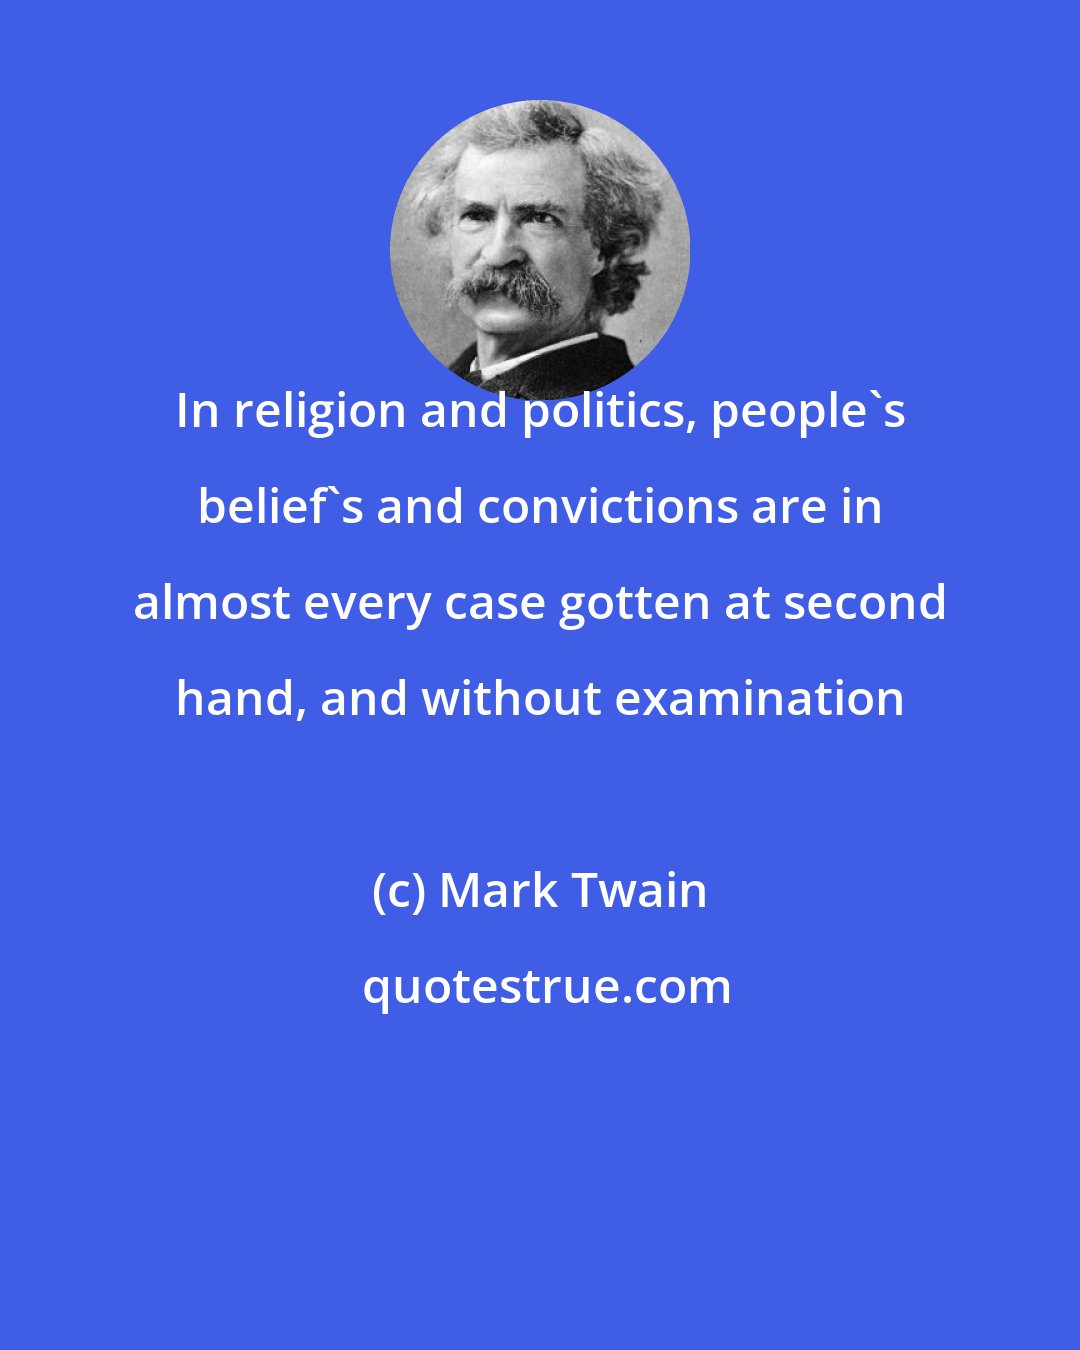 Mark Twain: In religion and politics, people's belief's and convictions are in almost every case gotten at second hand, and without examination